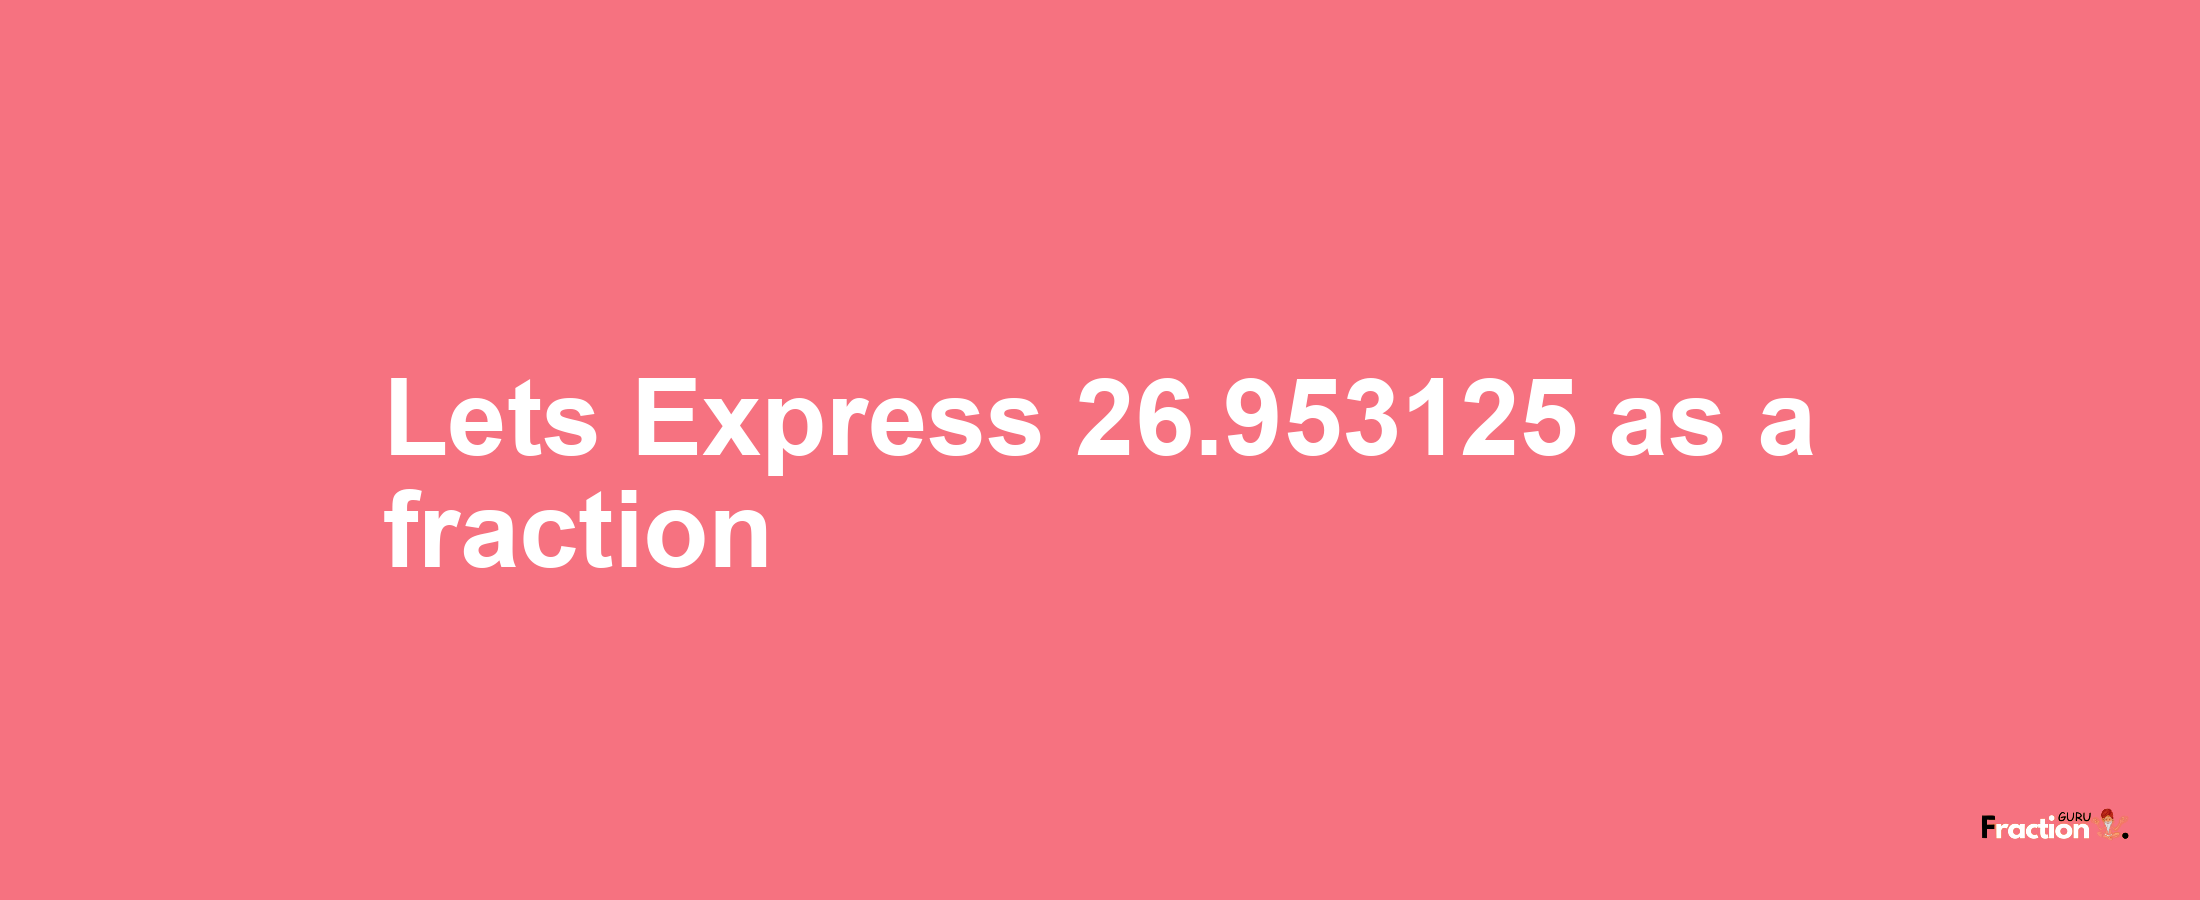 Lets Express 26.953125 as afraction